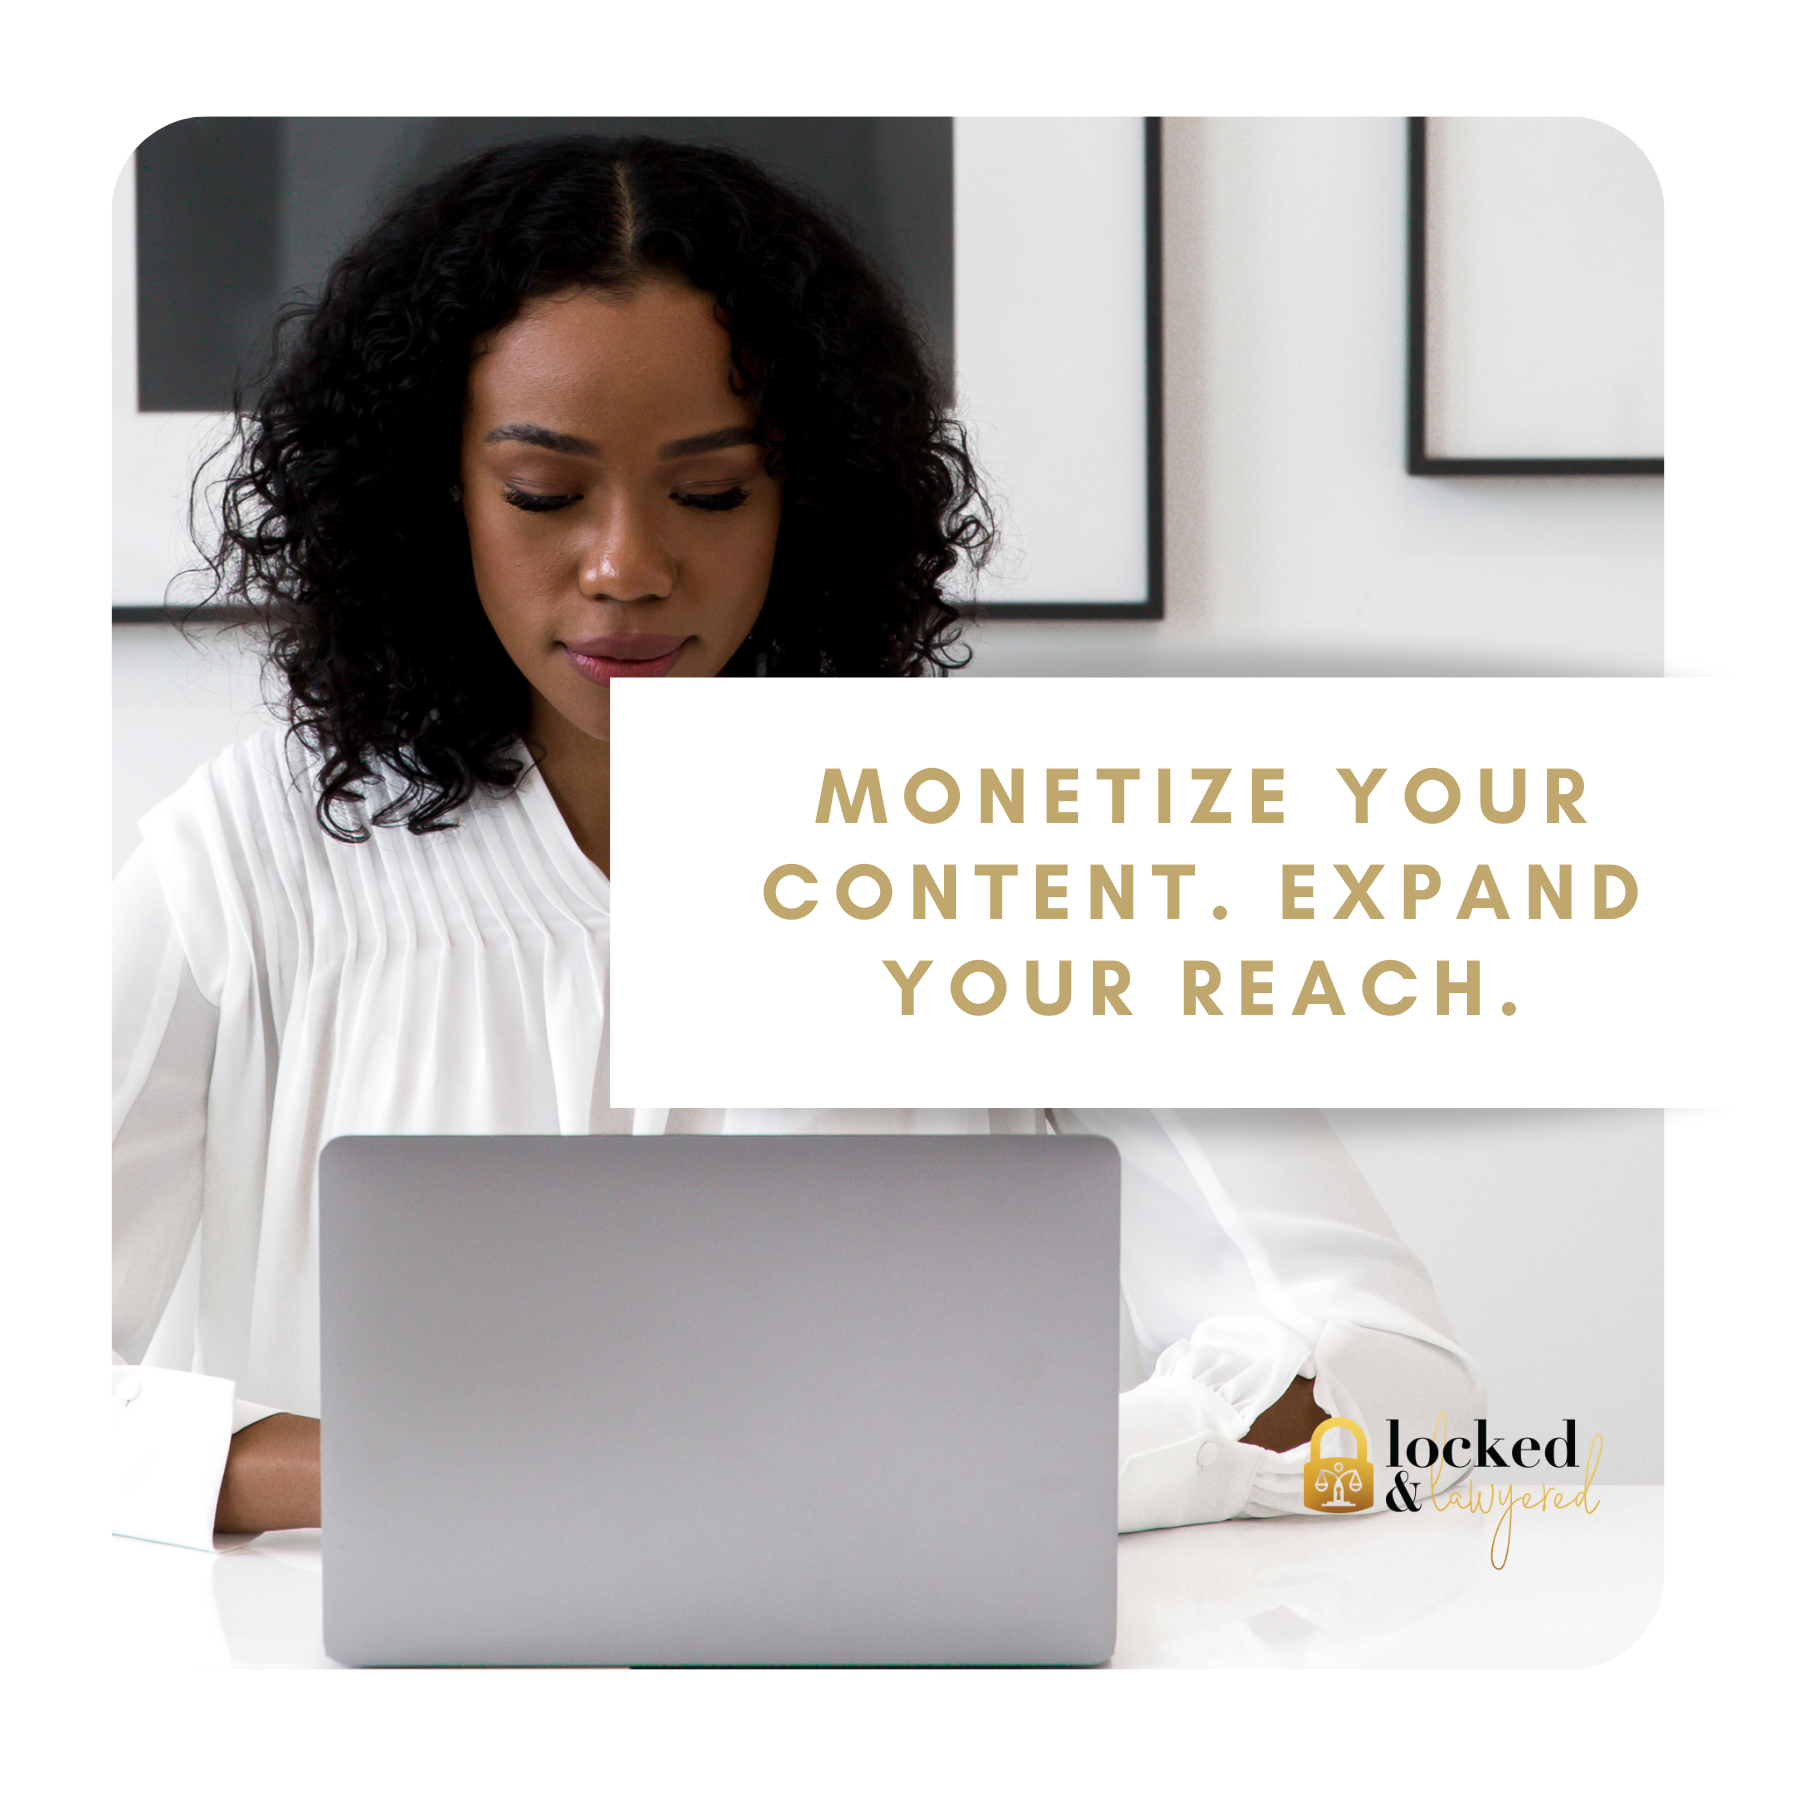 Monetize Your Content. Expand Your Reach.